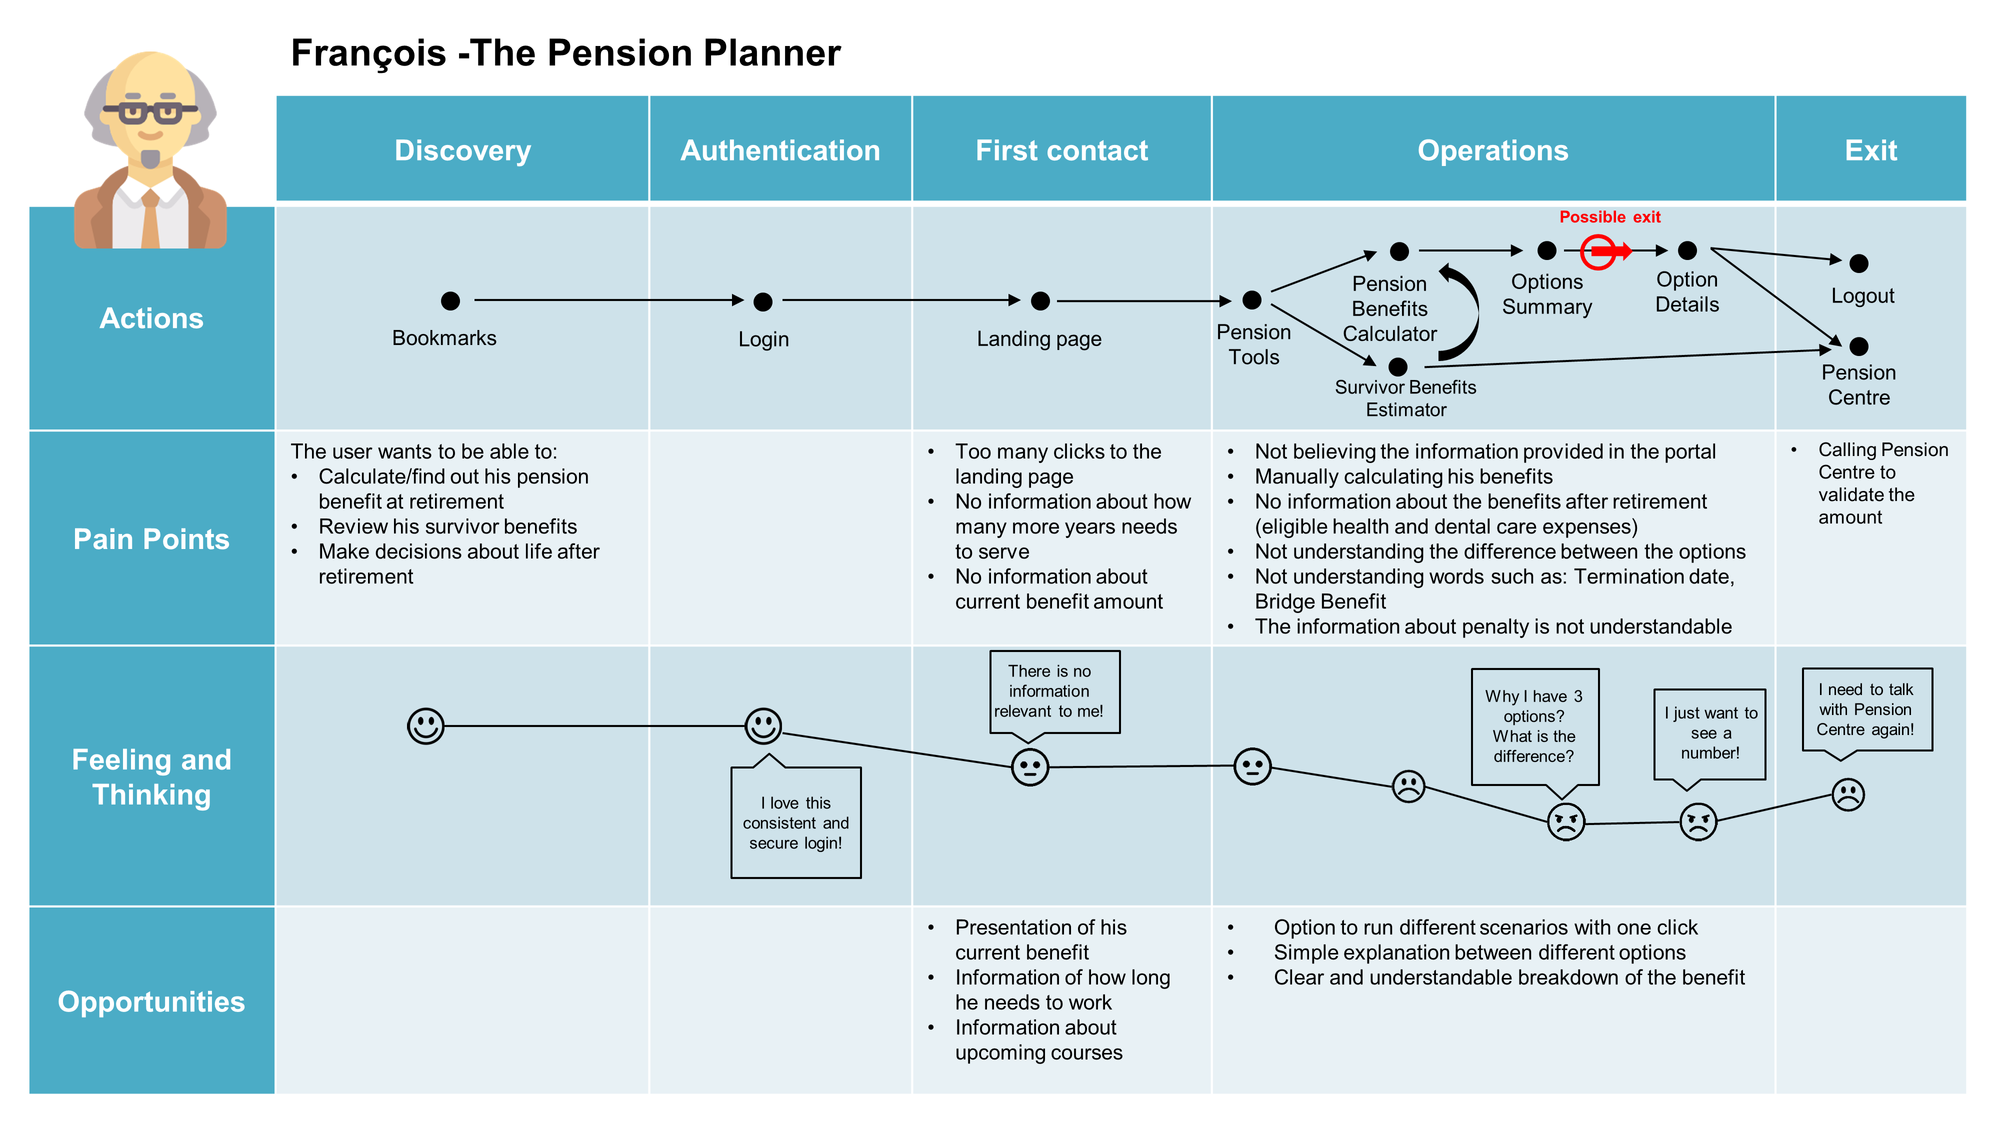 Long Description:  This is the journey map for François, the pension planner, as he uses the pension portal. The journey map captures François’ actions, his pain points, what he is feeling and thinking, and opportunities for each stage of his journey: discovery, authentication, first contact, operations and exit.  In the discovery phase of François’ journey: •	Action: François creates a bookmark.  •	Pain points: François wants to be able to: o	Calculate or find out his pension benefit at retirement o	Review his survivor benefits o	Make decisions about life after retirement •	Feeling and thinking: François is happy •	Opportunities: None  In the authentication phase of François’ journey: •	Action: François logs in •	Pain points: None •	Feeling and thinking: François is happy and thinks, “I love this consistent and secure login!” •	Opportunities: None  In the first contact phase of François’ journey: •	Action: François goes to the landing page. •	Pain points:  o	Too many clicks to the landing page. o	No information about how many more years he needs to serve. o	No information about current benefit amount. •	Feeling and thinking: François is neutral and thinks, “There is no information relevant to me!” •	Opportunities:  o	Presentation of François’ current benefit o	Information on how long he needs to work o	Information about upcoming courses  In the operations phase of François’ journey: •	Action: François uses the pension tools. He uses the Pensions Benefits Calculator and the Survivor Benefits Estimator. He receives an Options Summary. He possibly exits the pension portal before looking at the Option Details. •	Pain Points: o	Not believing the information provided in the portal. o	Manually calculating his benefits. o	No information about the benefits after retirement (eligible health and dental care expenses). o	Not understanding the difference between the options. o	Not understanding words such as: Termination Date, Bridge Benefit. o	The information about penalty is not understandable. •	Feeling and thinking: François starts out neutral but becomes increasingly unhappy. François thinks, “Why do I have three options? What is the difference?” and “I just want to see a number!” •	Opportunities: o	Option to run different scenarios with one click. o	Simple explanation between different options. o	Clear and understandable breakdown of the benefit.  In the final exit phase of François’s journey: •	Action: François either logs out of the pension portal or contacts the Pension Centre. •	Pain Points: Having to call the Pension Centre to validate the amount. •	Feeling and thinking: François is unhappy, thinking, “I need to talk with the Pension Centre again!”  •	Opportunities: None.